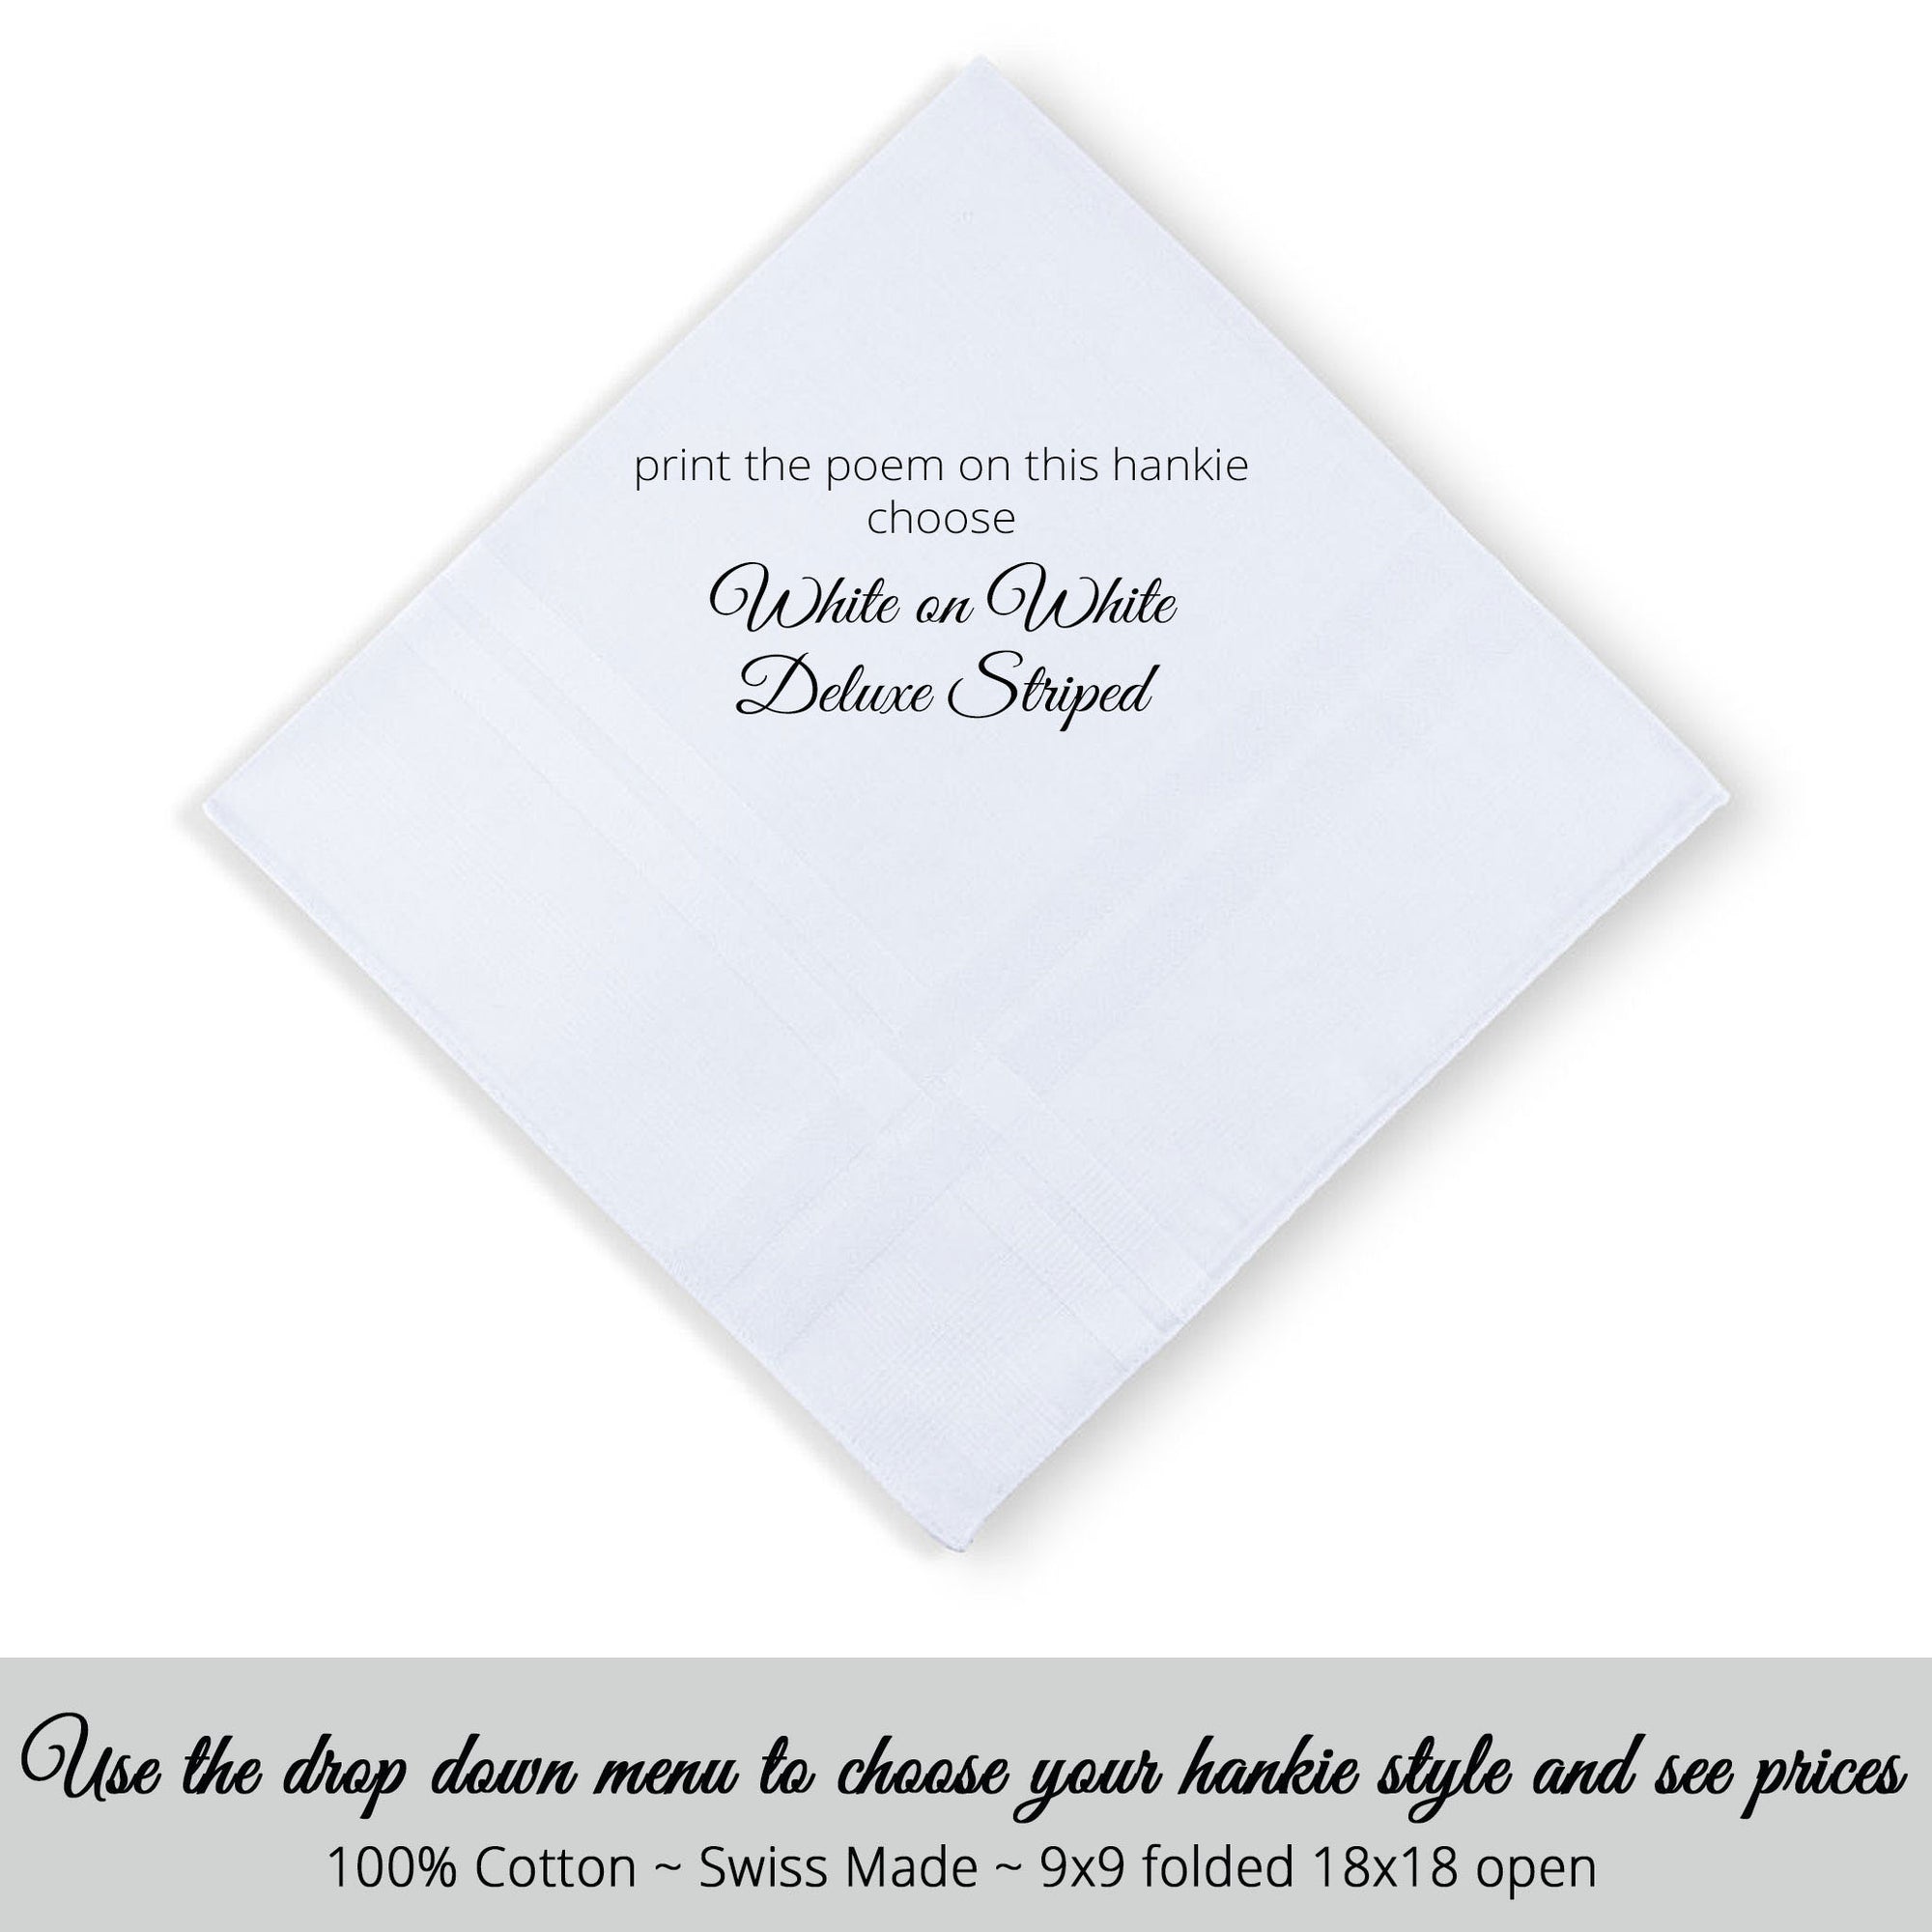 Wedding Swiss made man's handkerchief white on white deluxe striped for parents of the bride